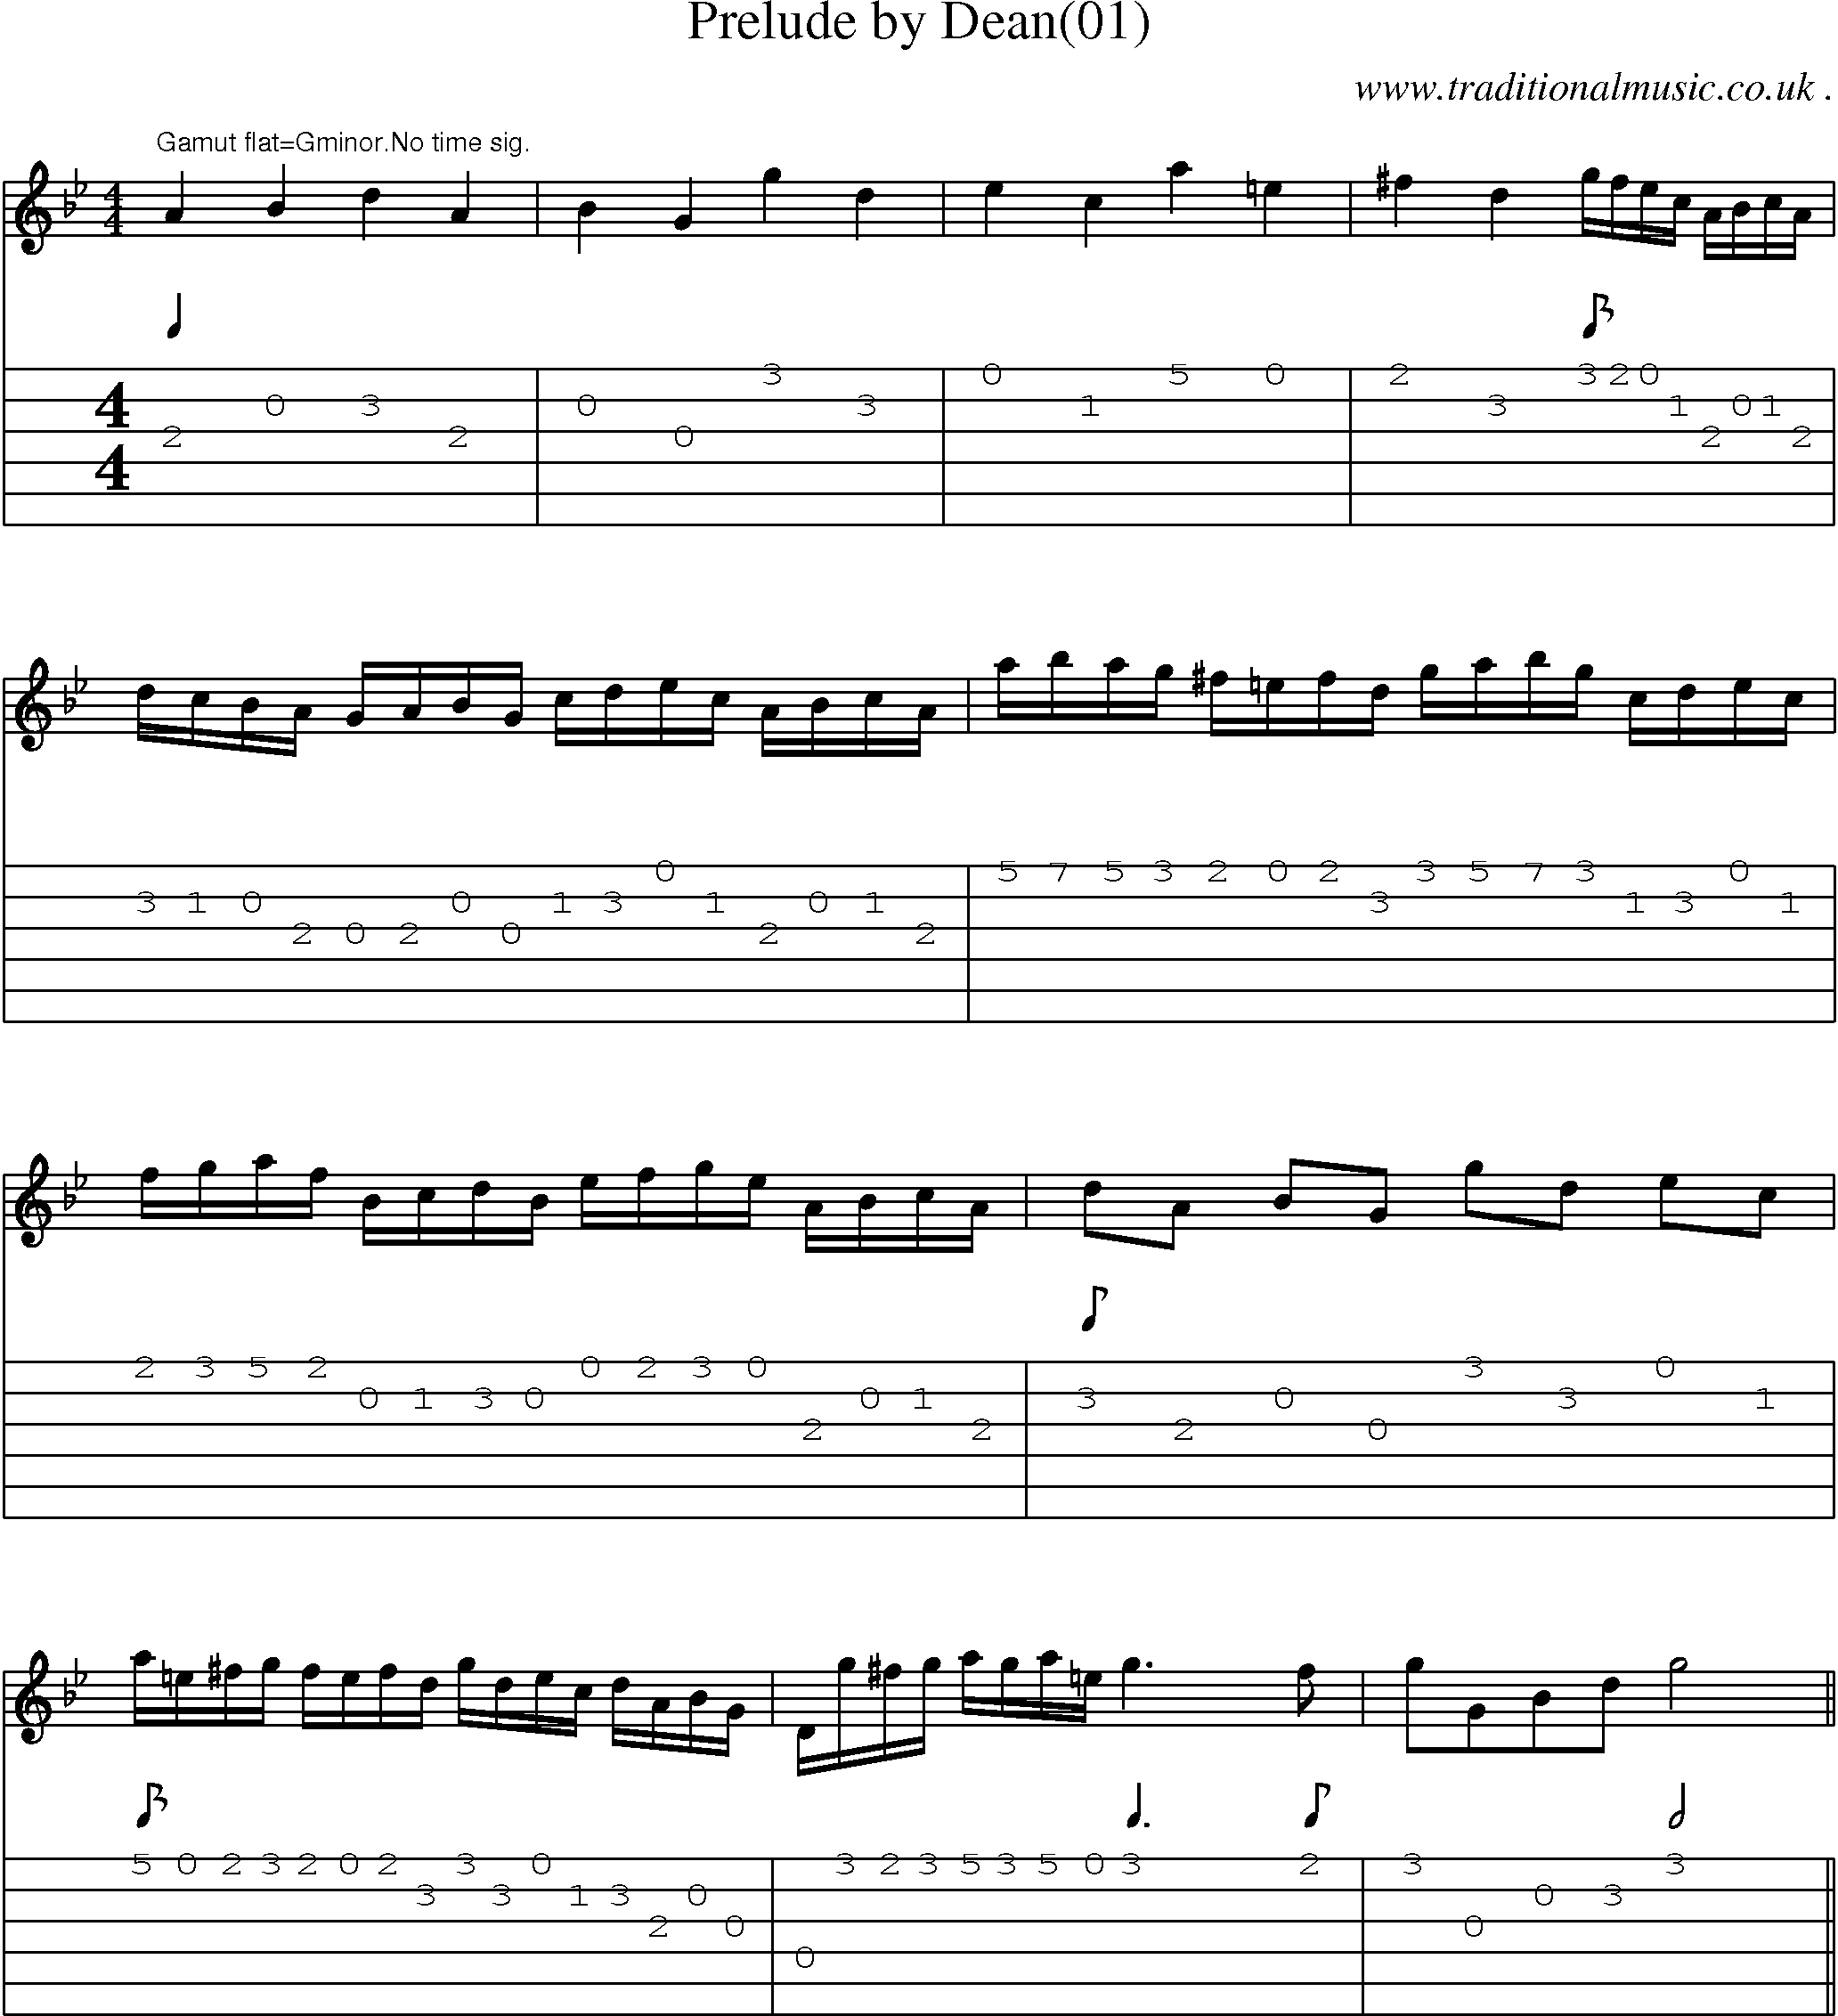 Sheet-Music and Guitar Tabs for Prelude By Dean(01)